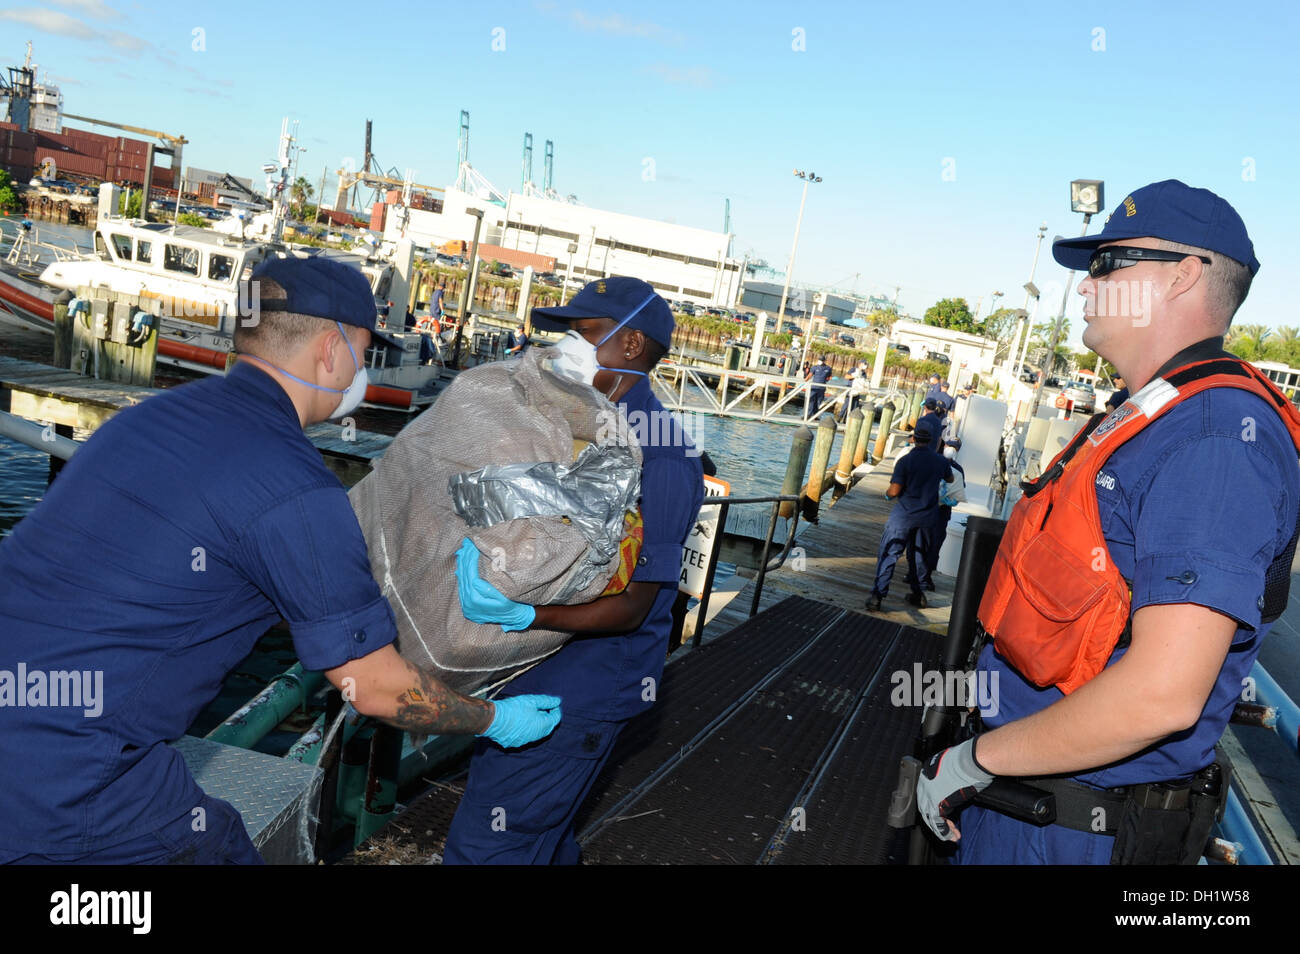 Coast Guard Station Miami members offload bales of cocaine and marijuana at Coast Guard Base Miami Beach, Oct. 11, 2013. The total offloaded was 15 bales of cocaine and 50 bales of marijuana with an estimated wholesale value of $16 million. Stock Photo